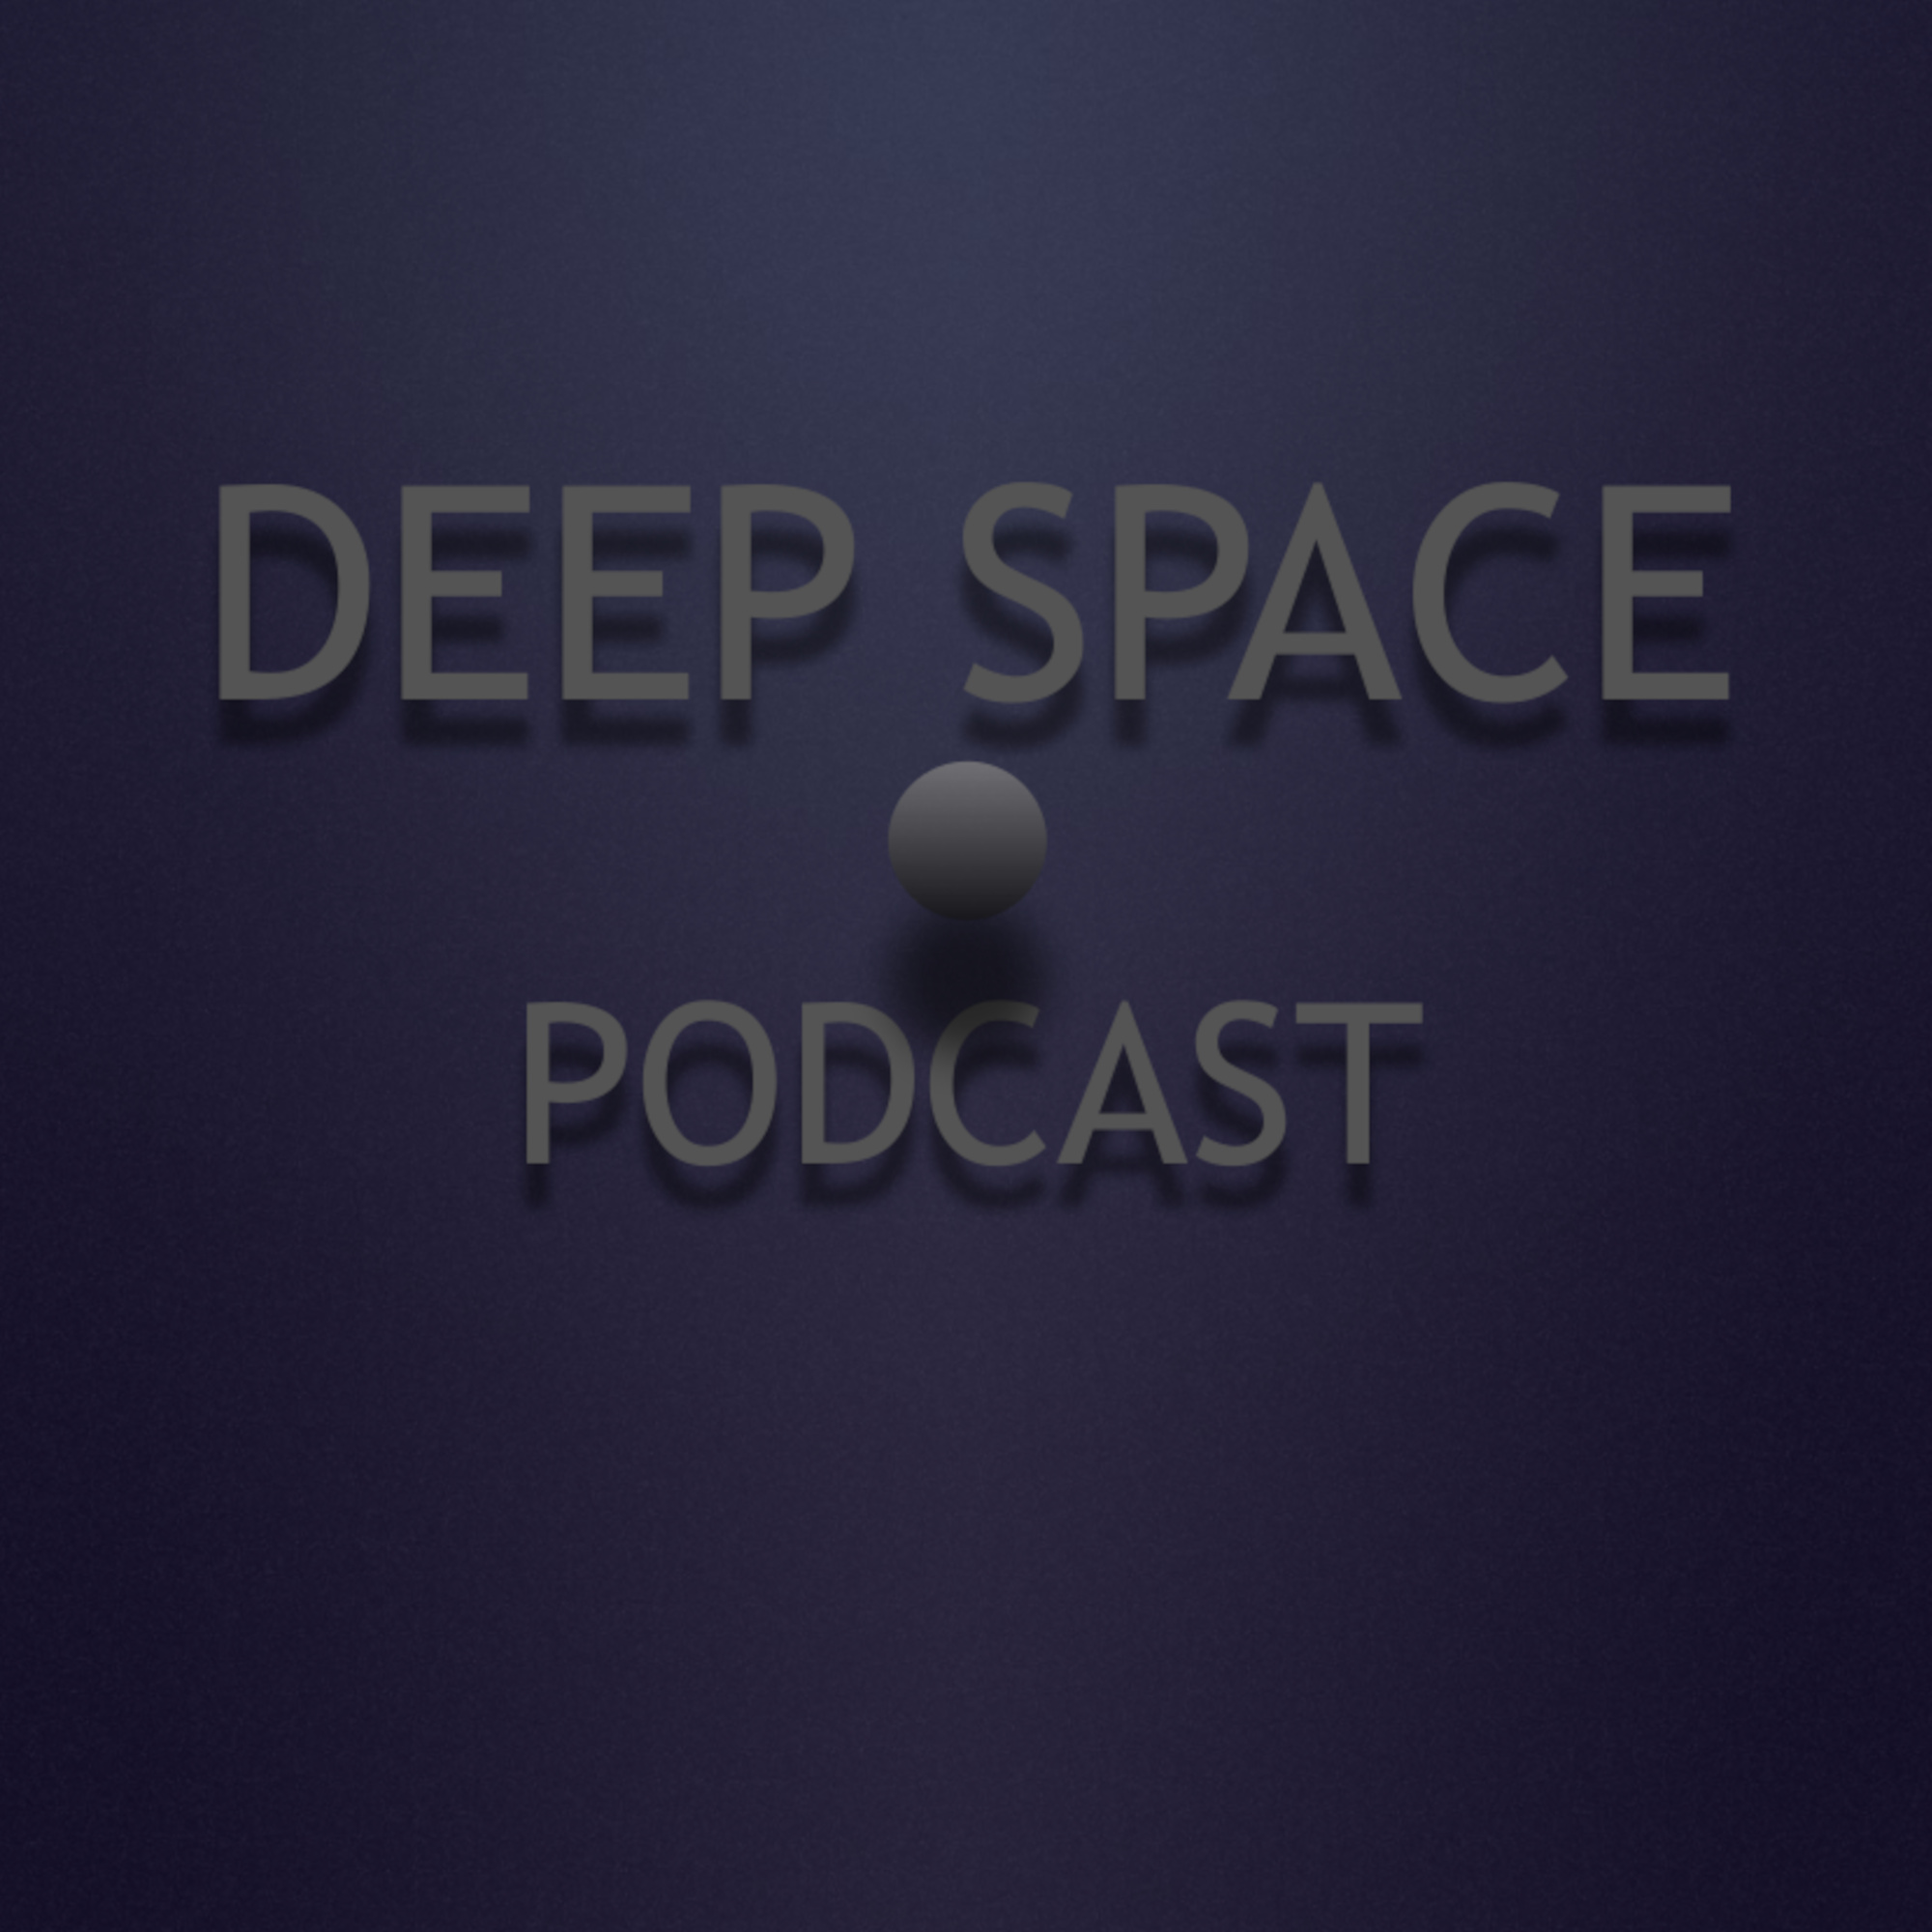 Deep Space Podcast - hosted by Marcelo Tavares